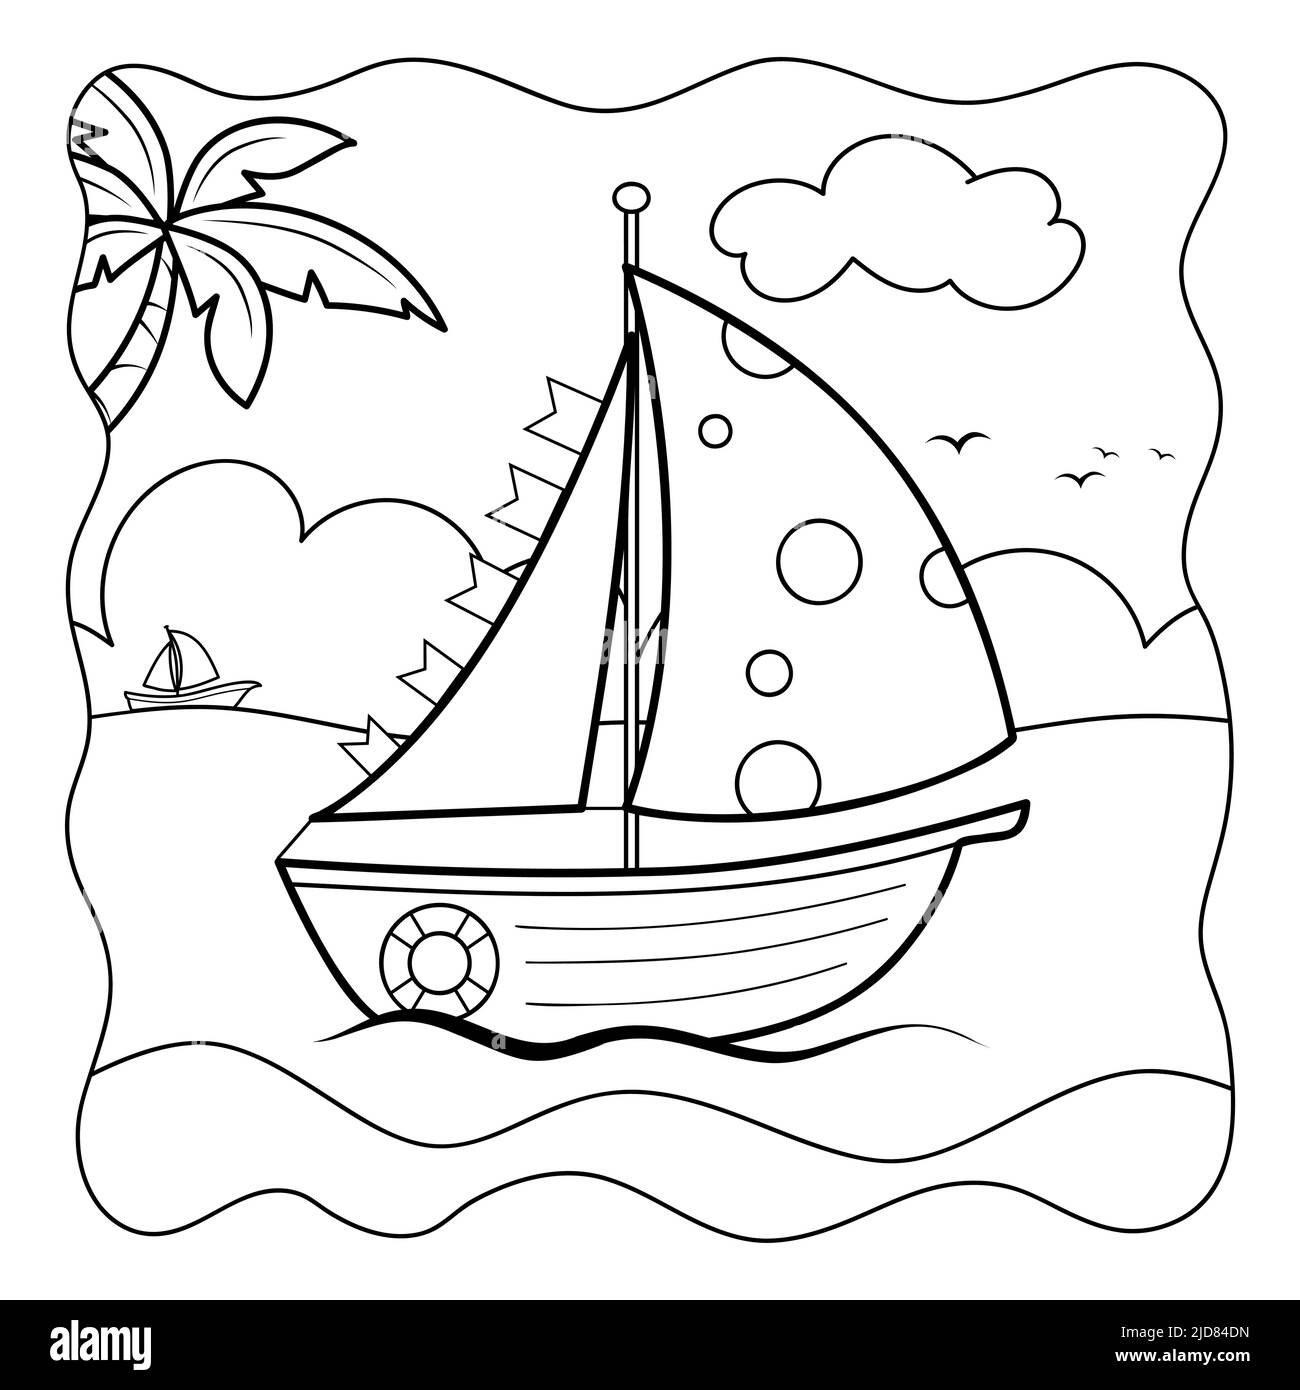 How to Draw a boat Step By Step – For Kids & Beginners-saigonsouth.com.vn